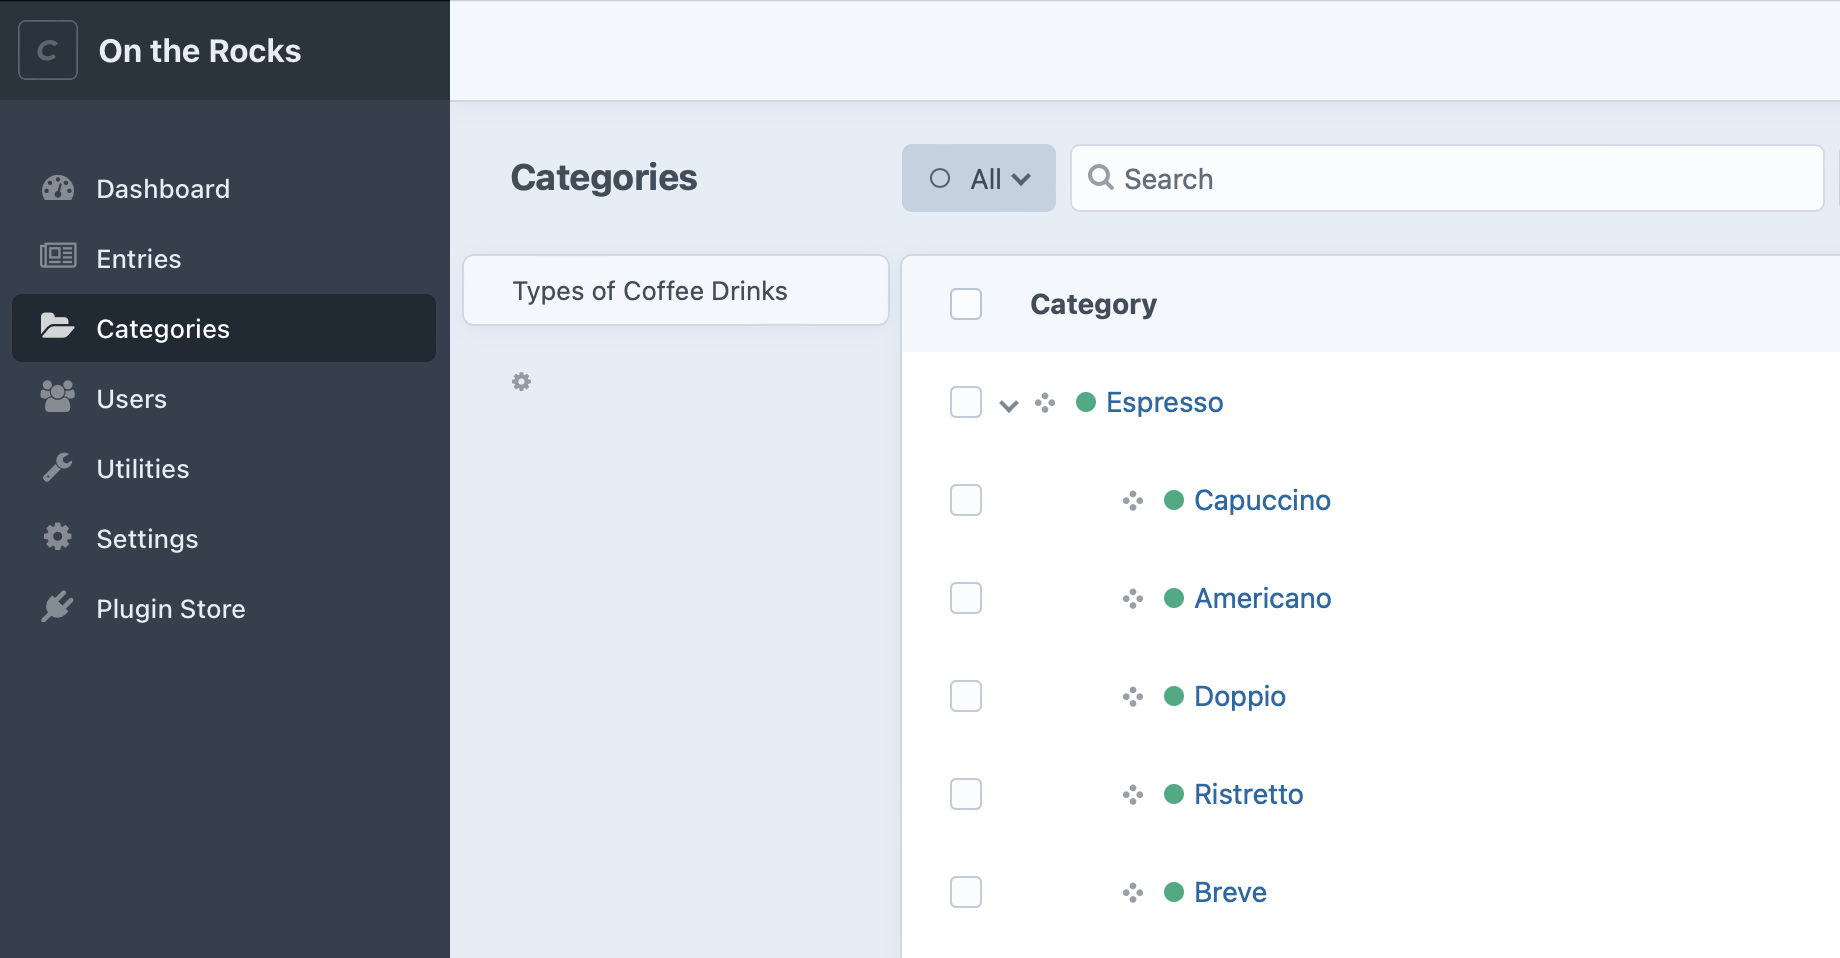 Screenshot of the categories index, with “Categories” active in the main navigation, the “Types of Coffee Drinks” category group selected, and a listing of category names in a nested hierarchy